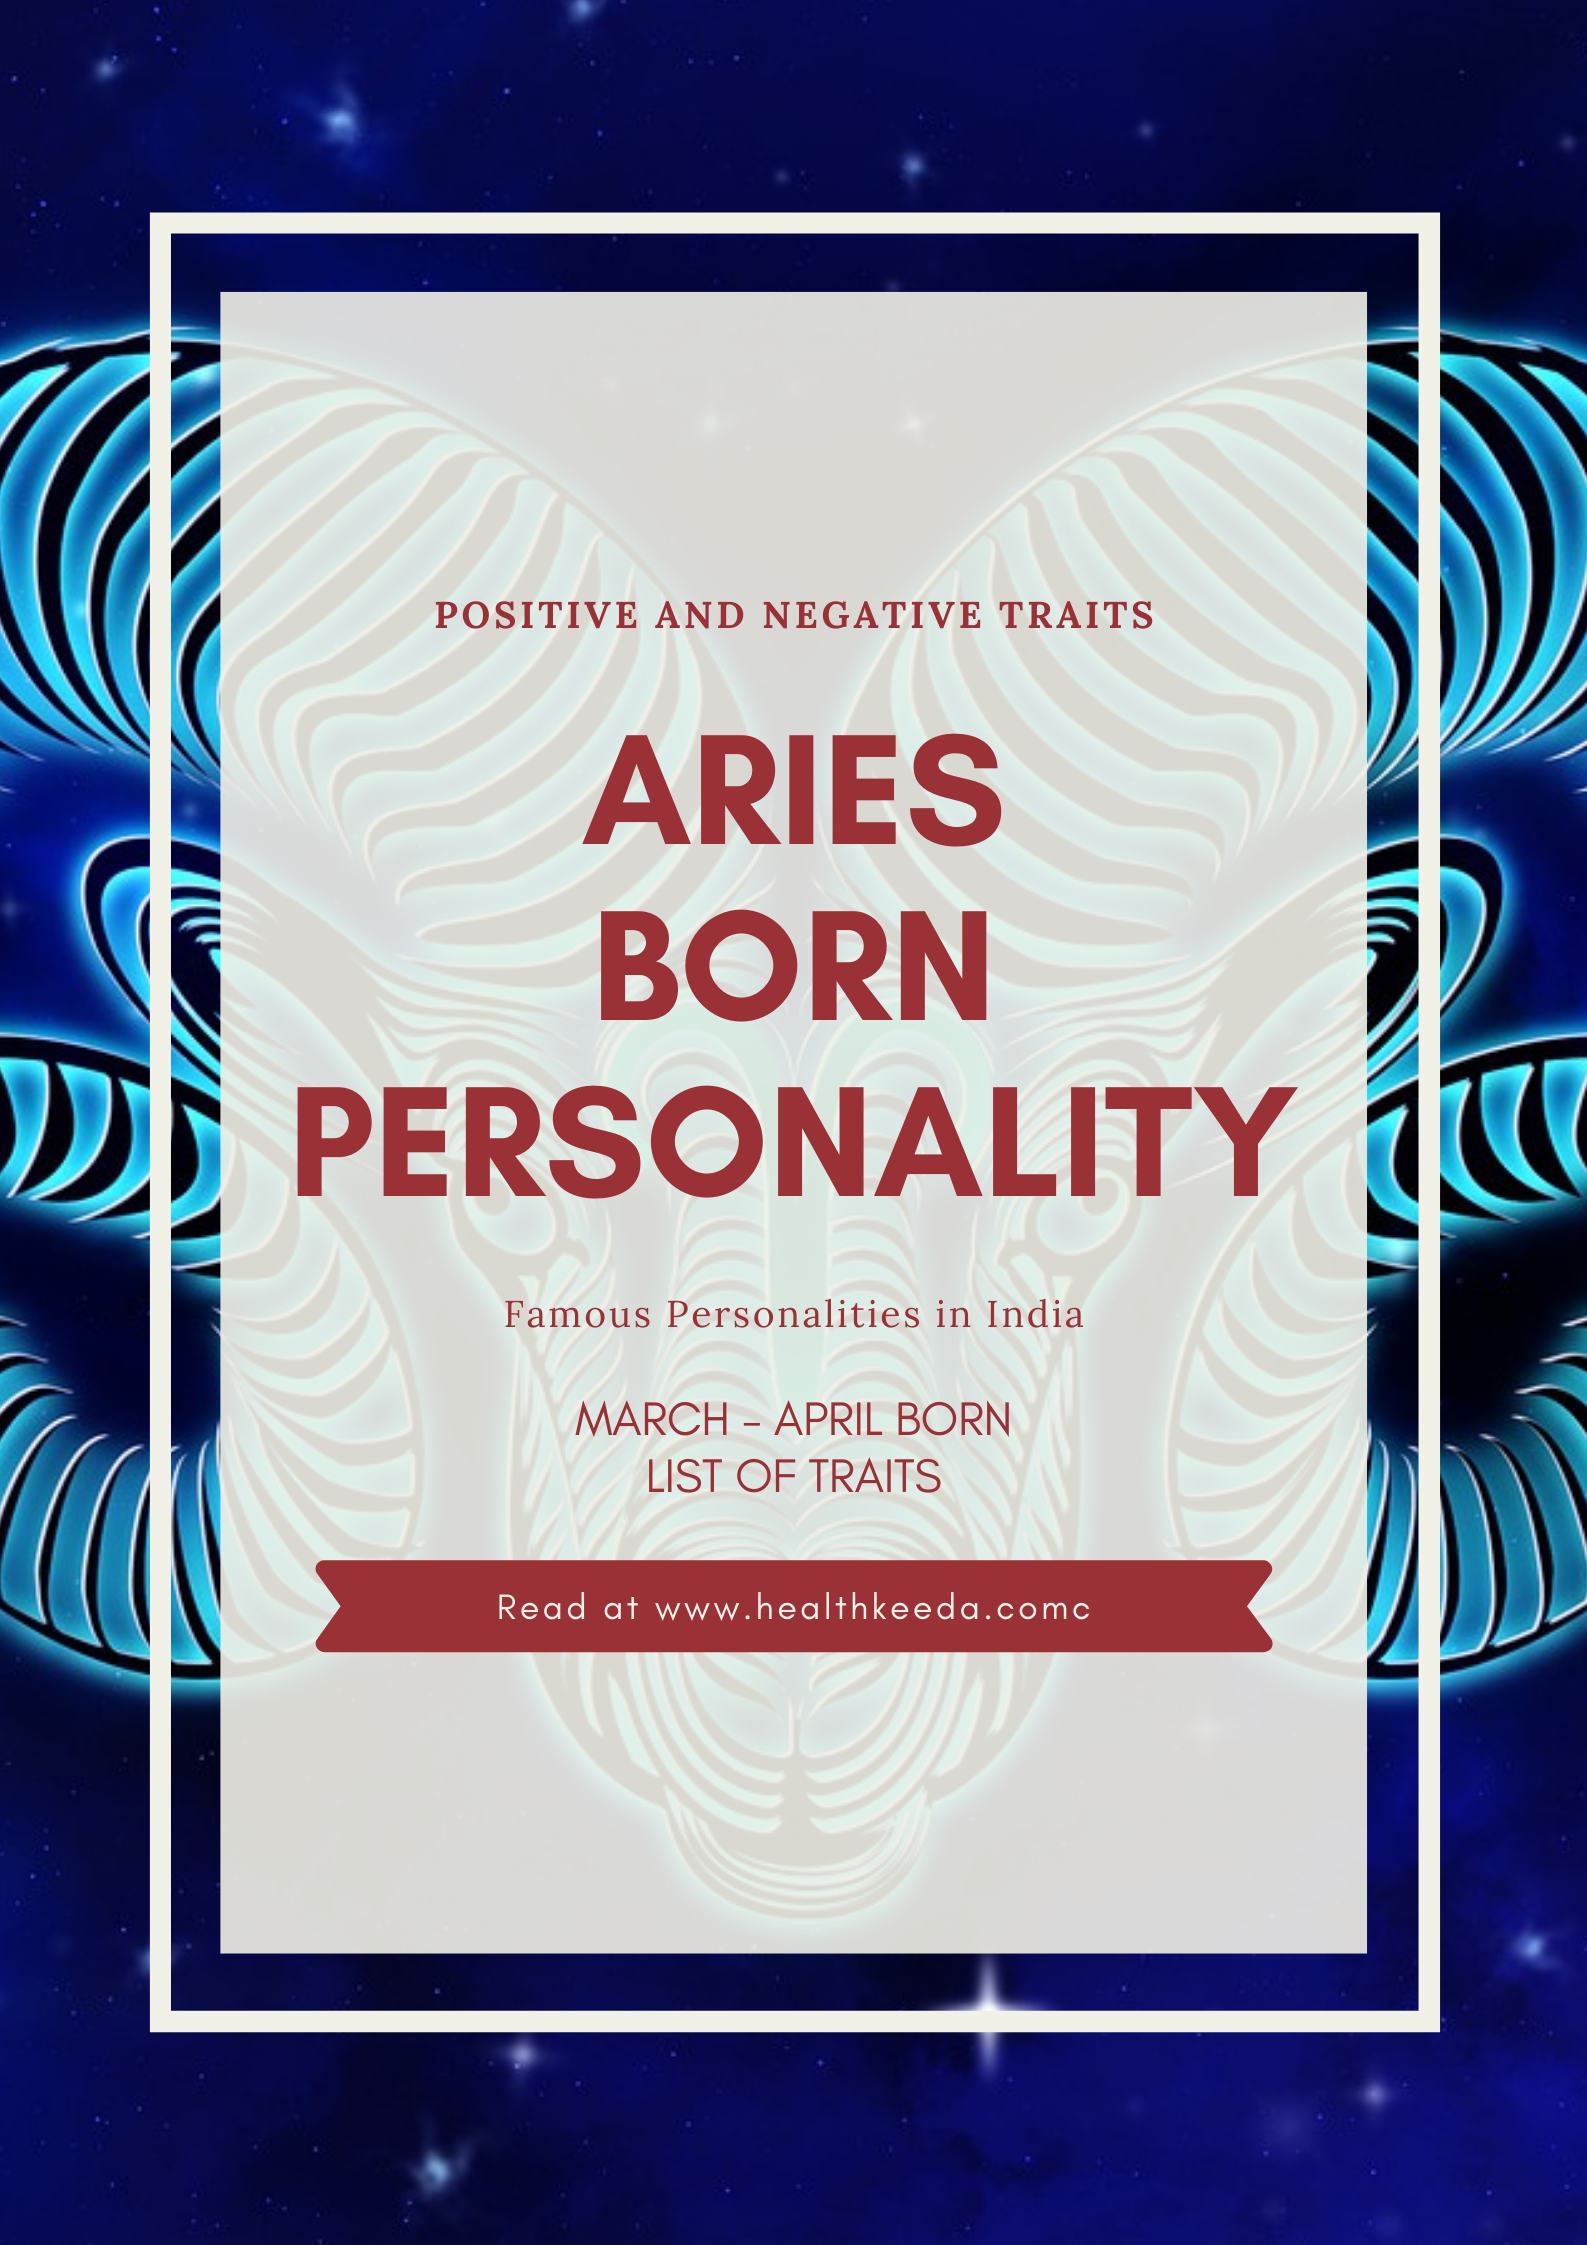 Aries born personality